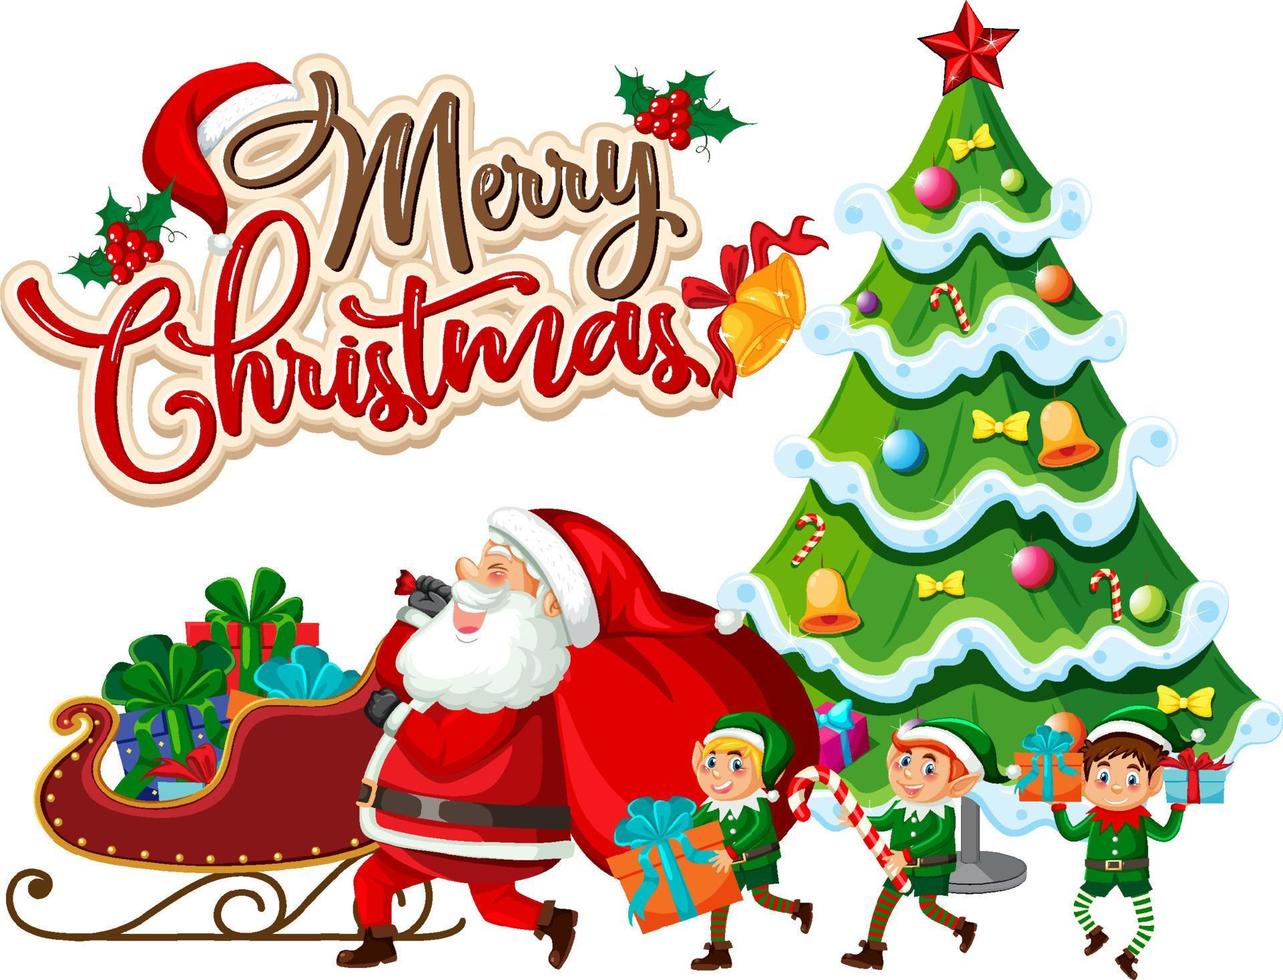 Merry Christmas text with cartoon character vector